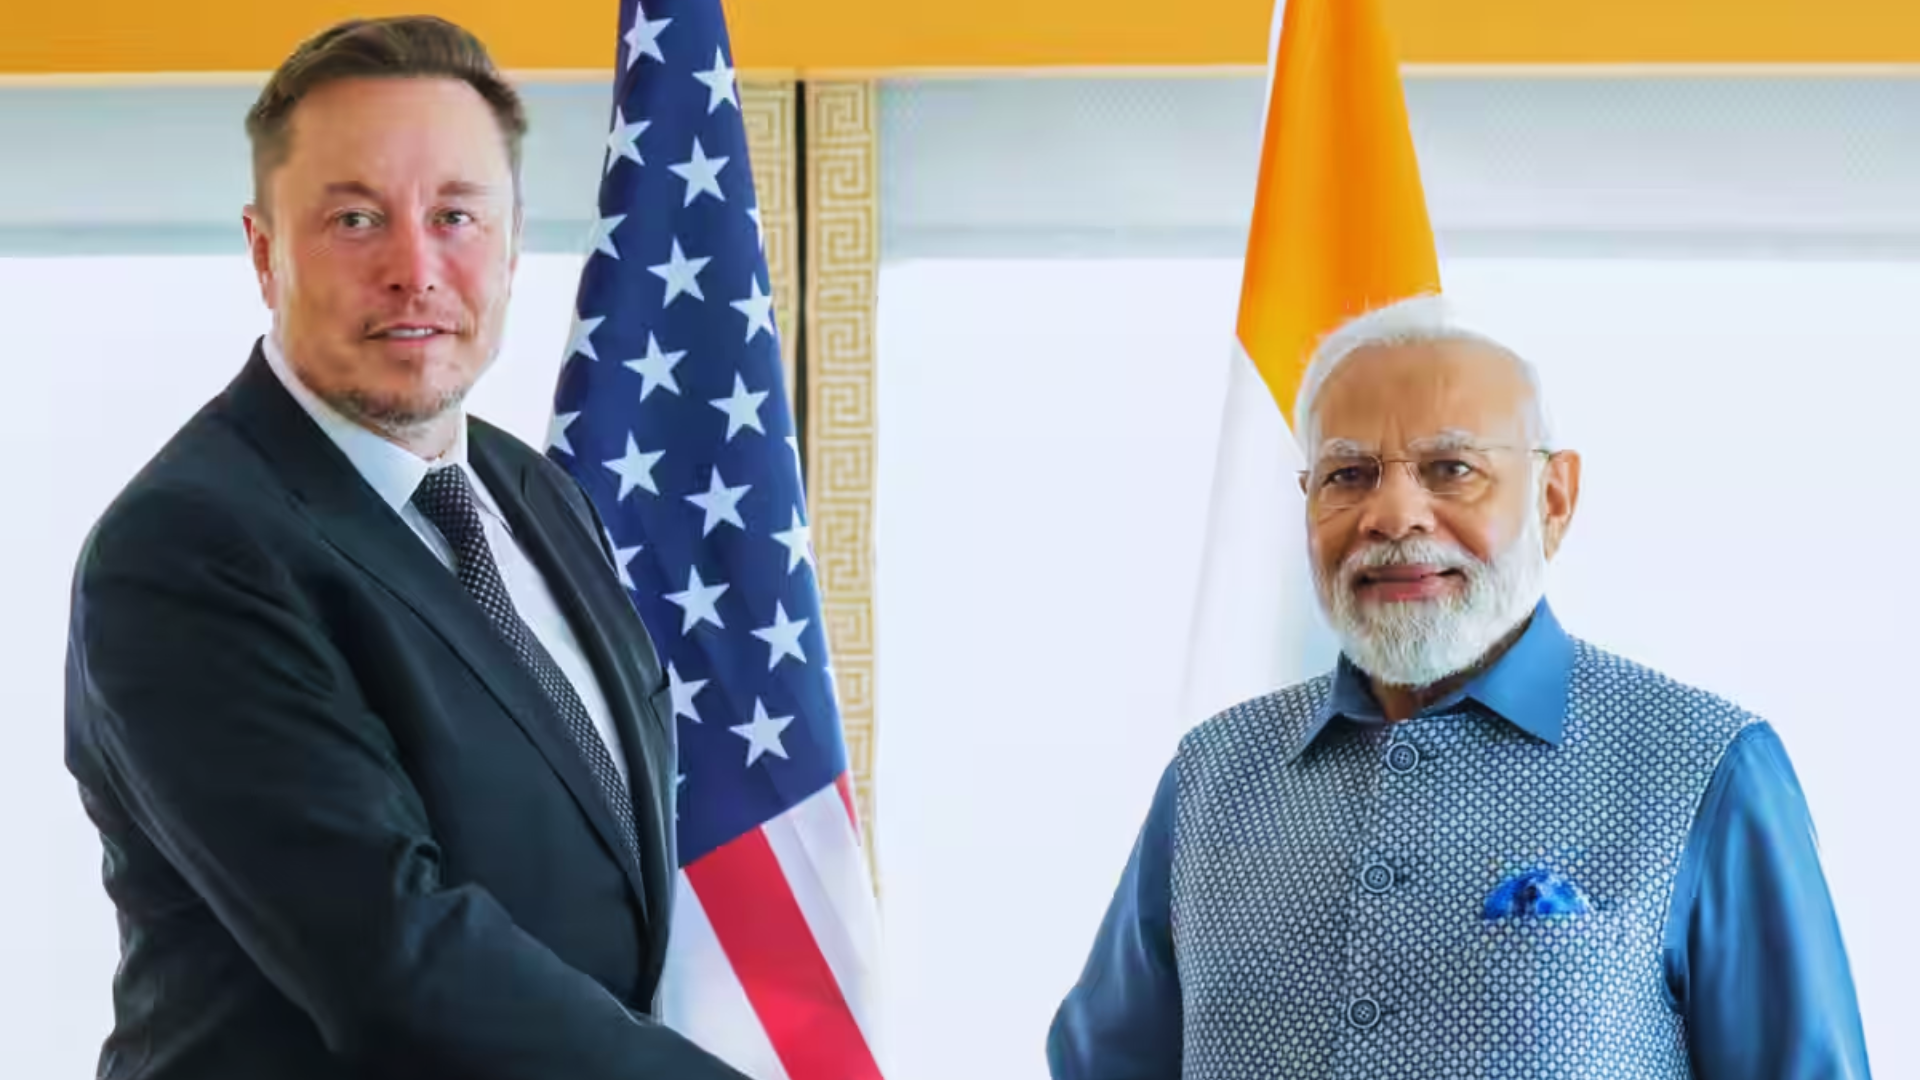 Why Is Elon Musk Meeting PM Modi? Tesla CEO Might Unveil New Investment Plans For His Automative Company